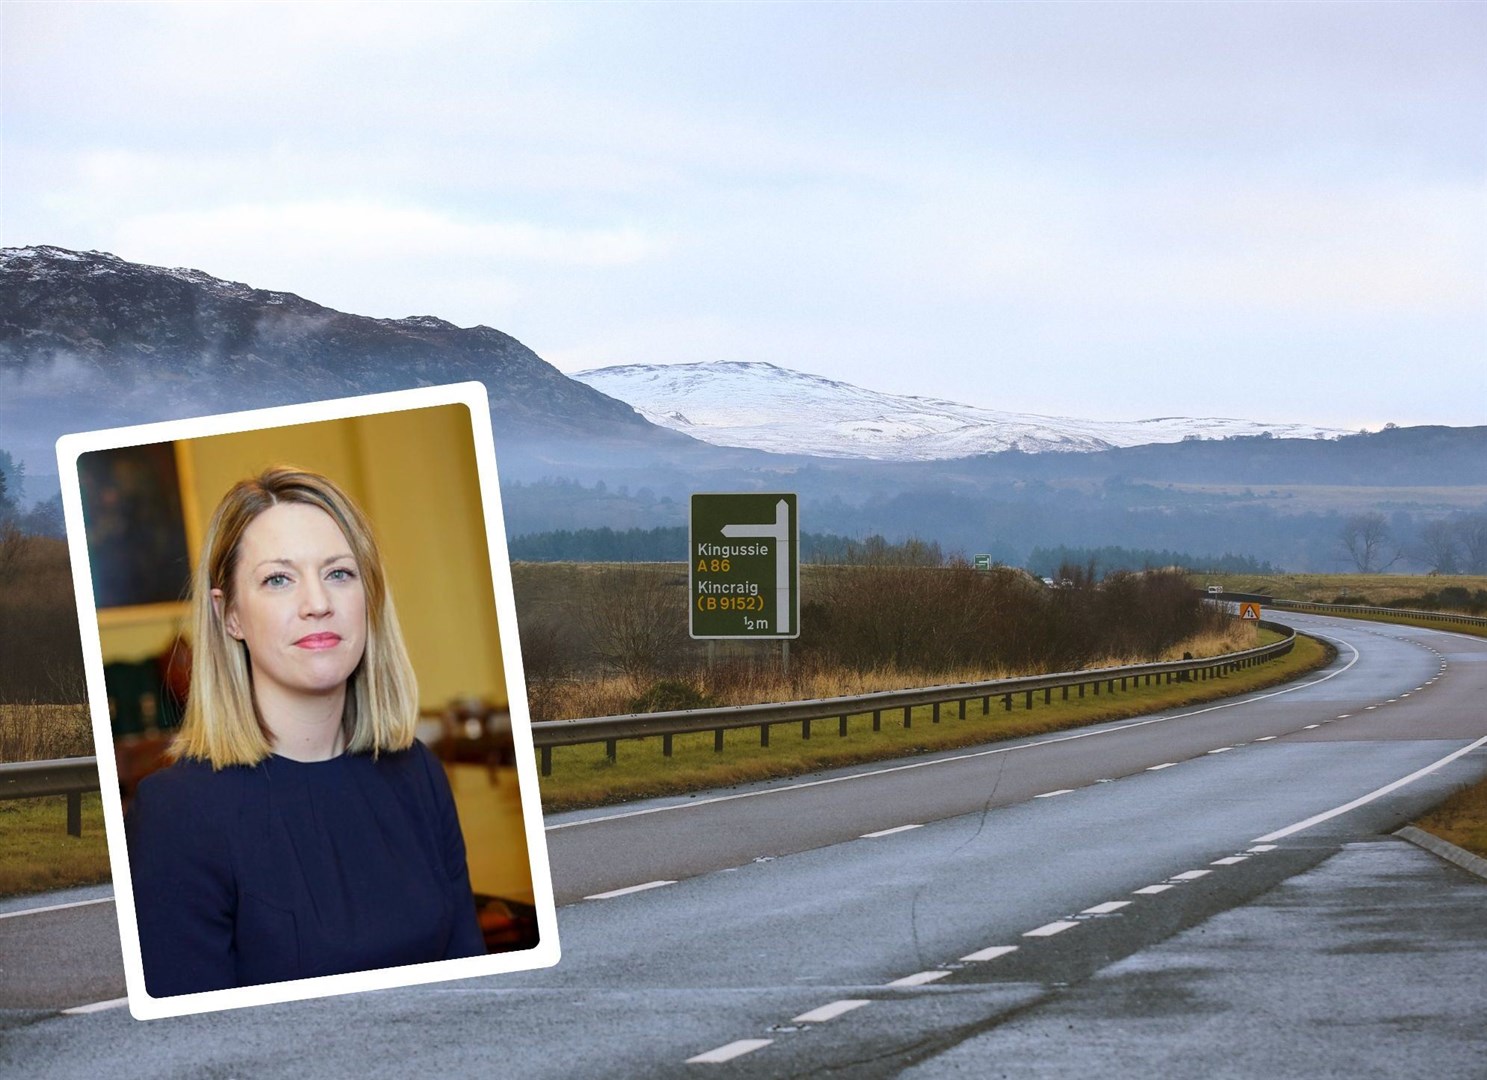 Jenny Gilruth (inset) has said: "One life lost on Scotland’s roads is one too many."